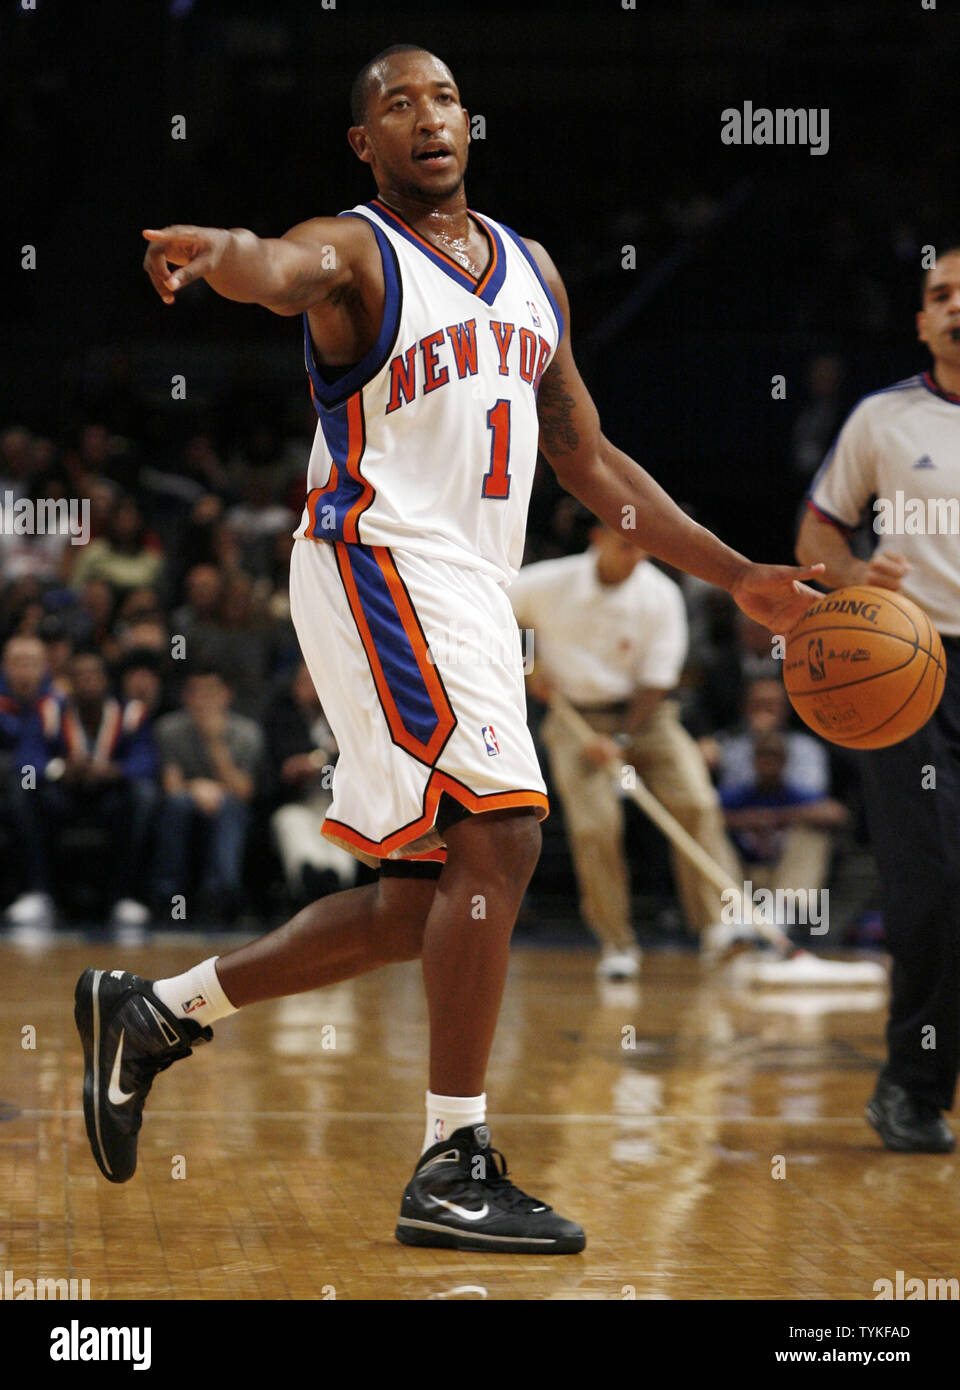 new-york-knicks-chris-duhon-directs-the-offense-in-the-first-quarter-of-a-preseason-game-against-the-philadelphia-76ers-at-madison-square-garden-in-new-york-city-on-october-13-2009-upijohn-angelillo-TYKFAD.jpg